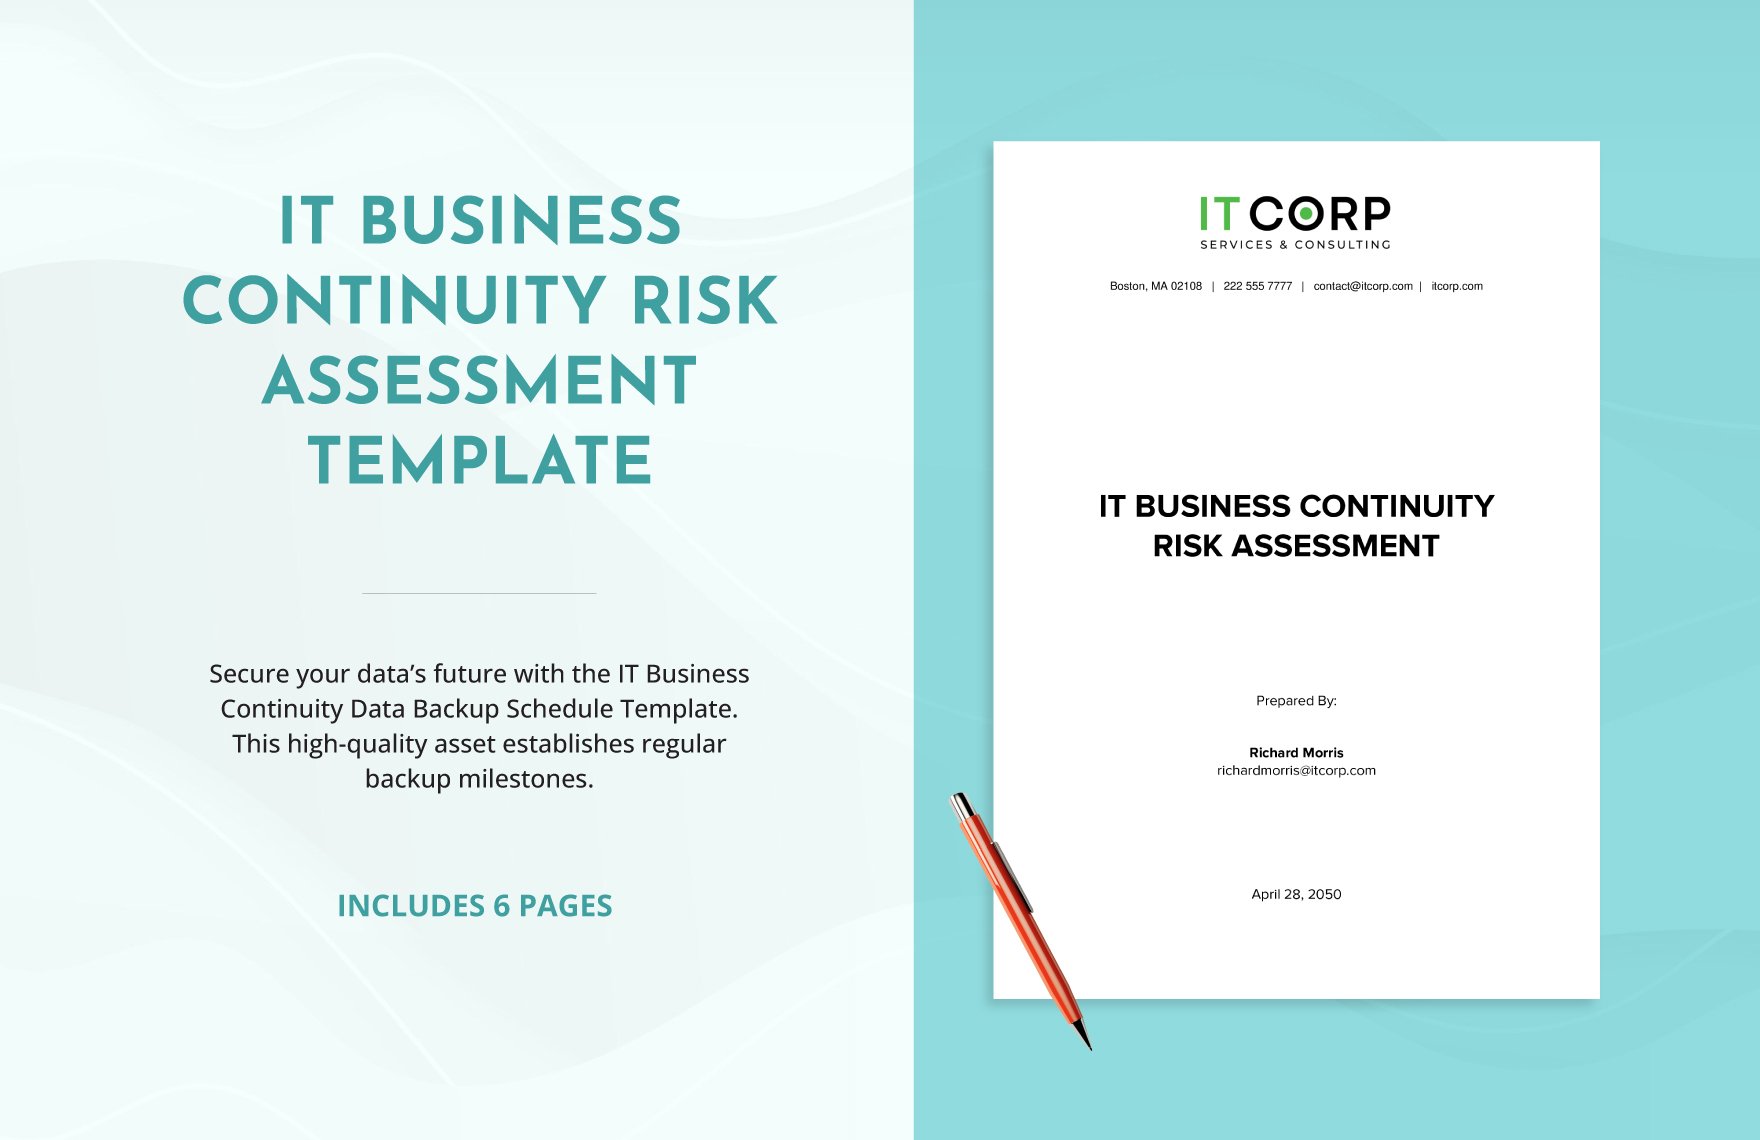 IT Business Continuity Risk Assessment Template